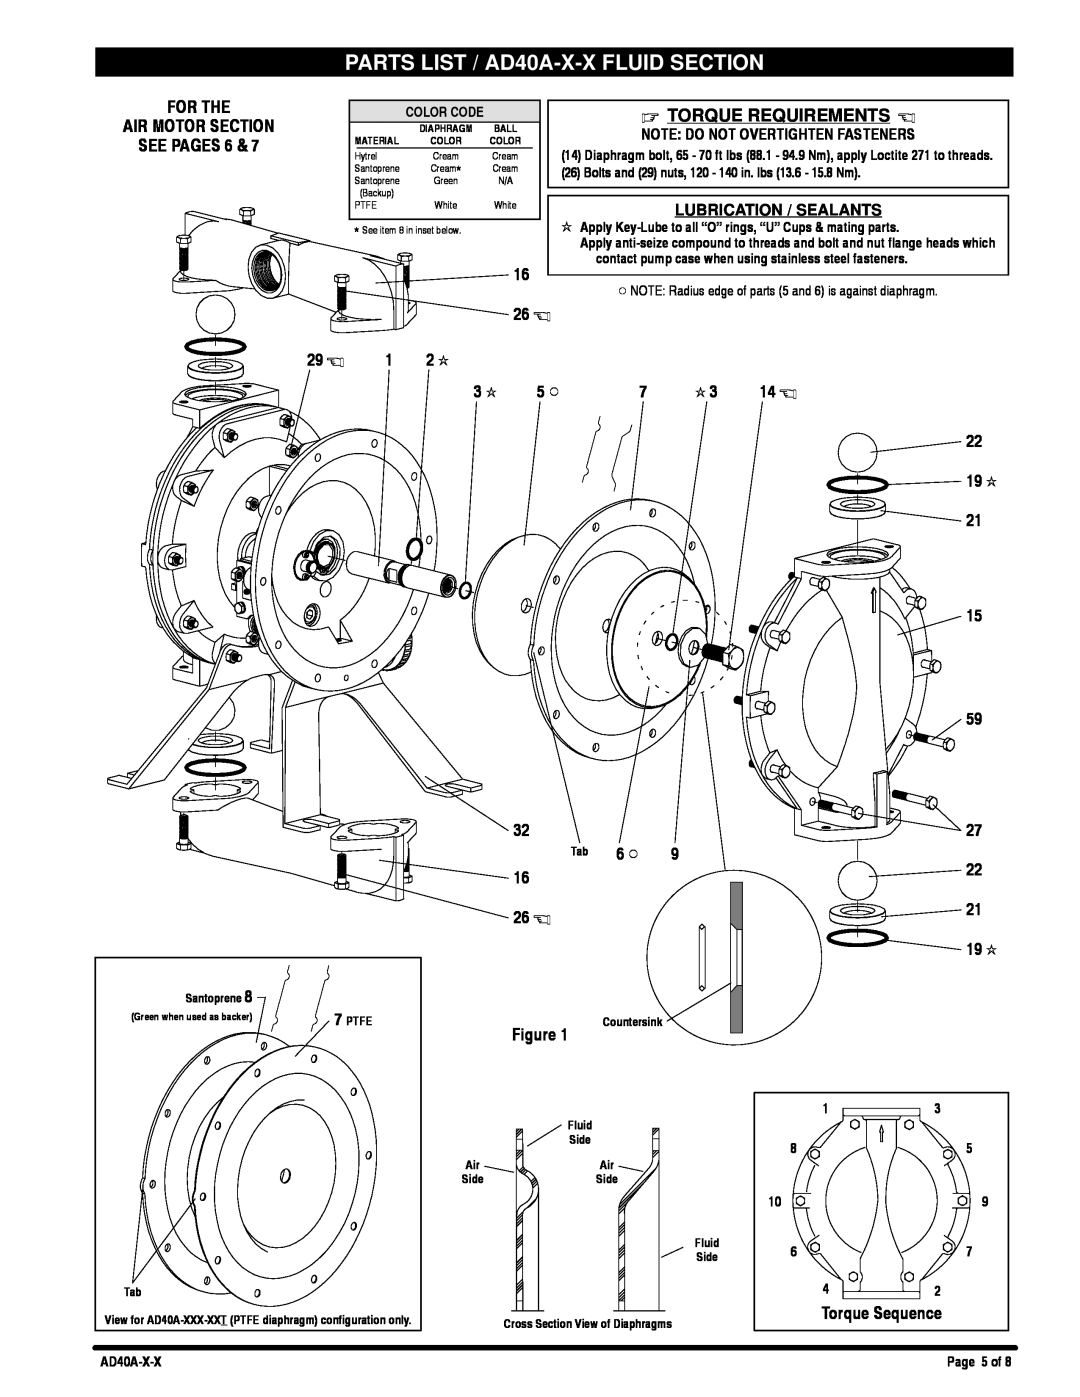 Ingersoll-Rand manual PARTS LIST / AD40A-X-XFLUID SECTION, For The Air Motor Section See Pages 